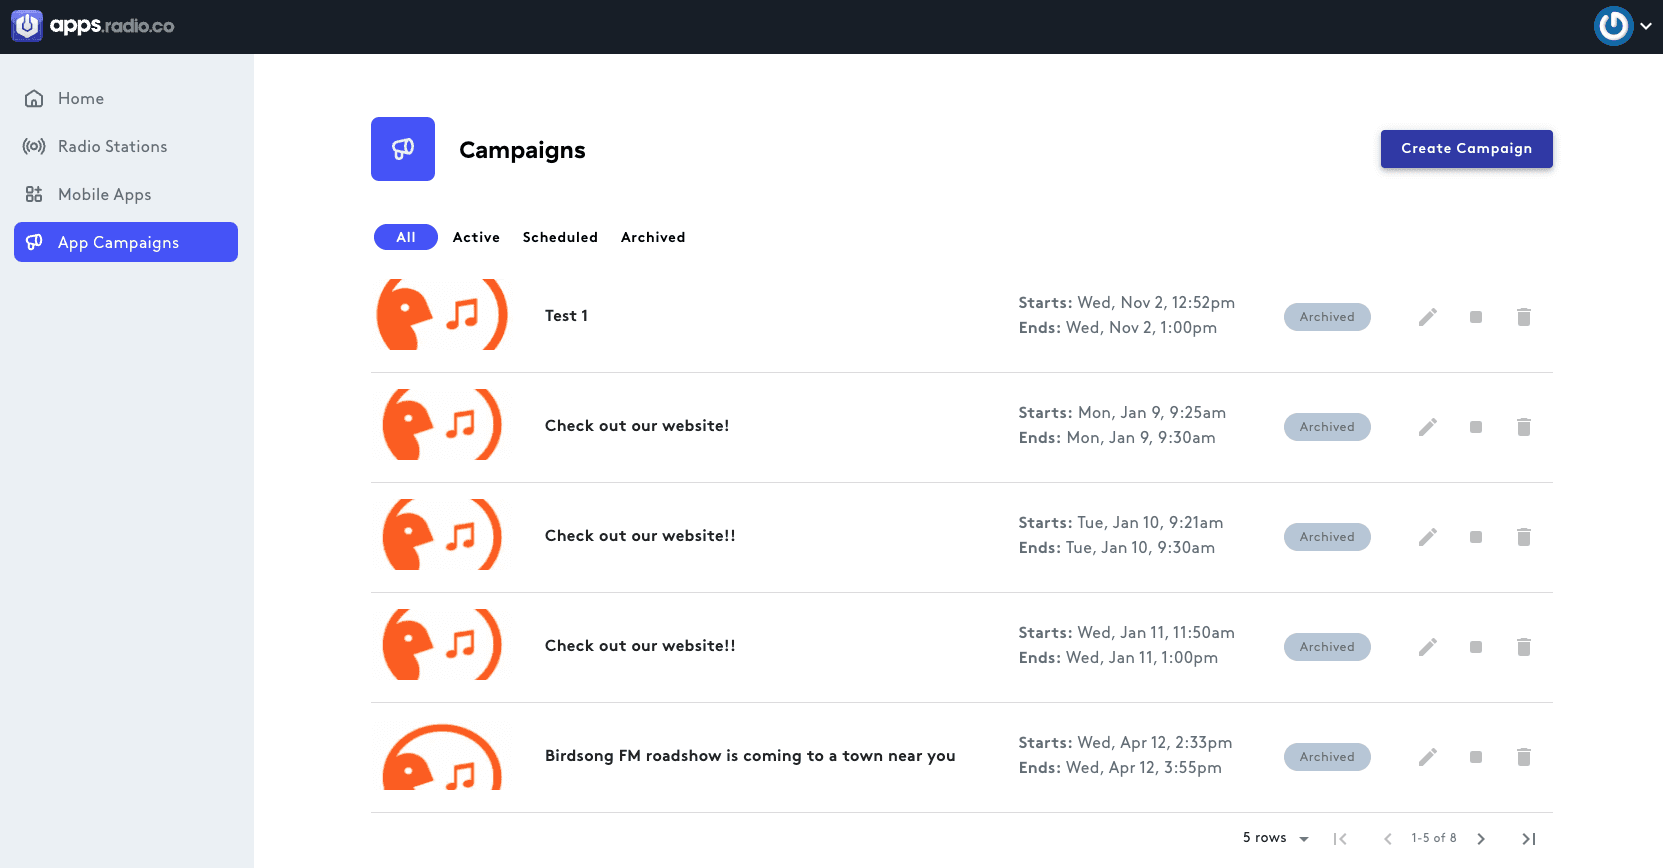 All live, scheduled, and archived campaigns.